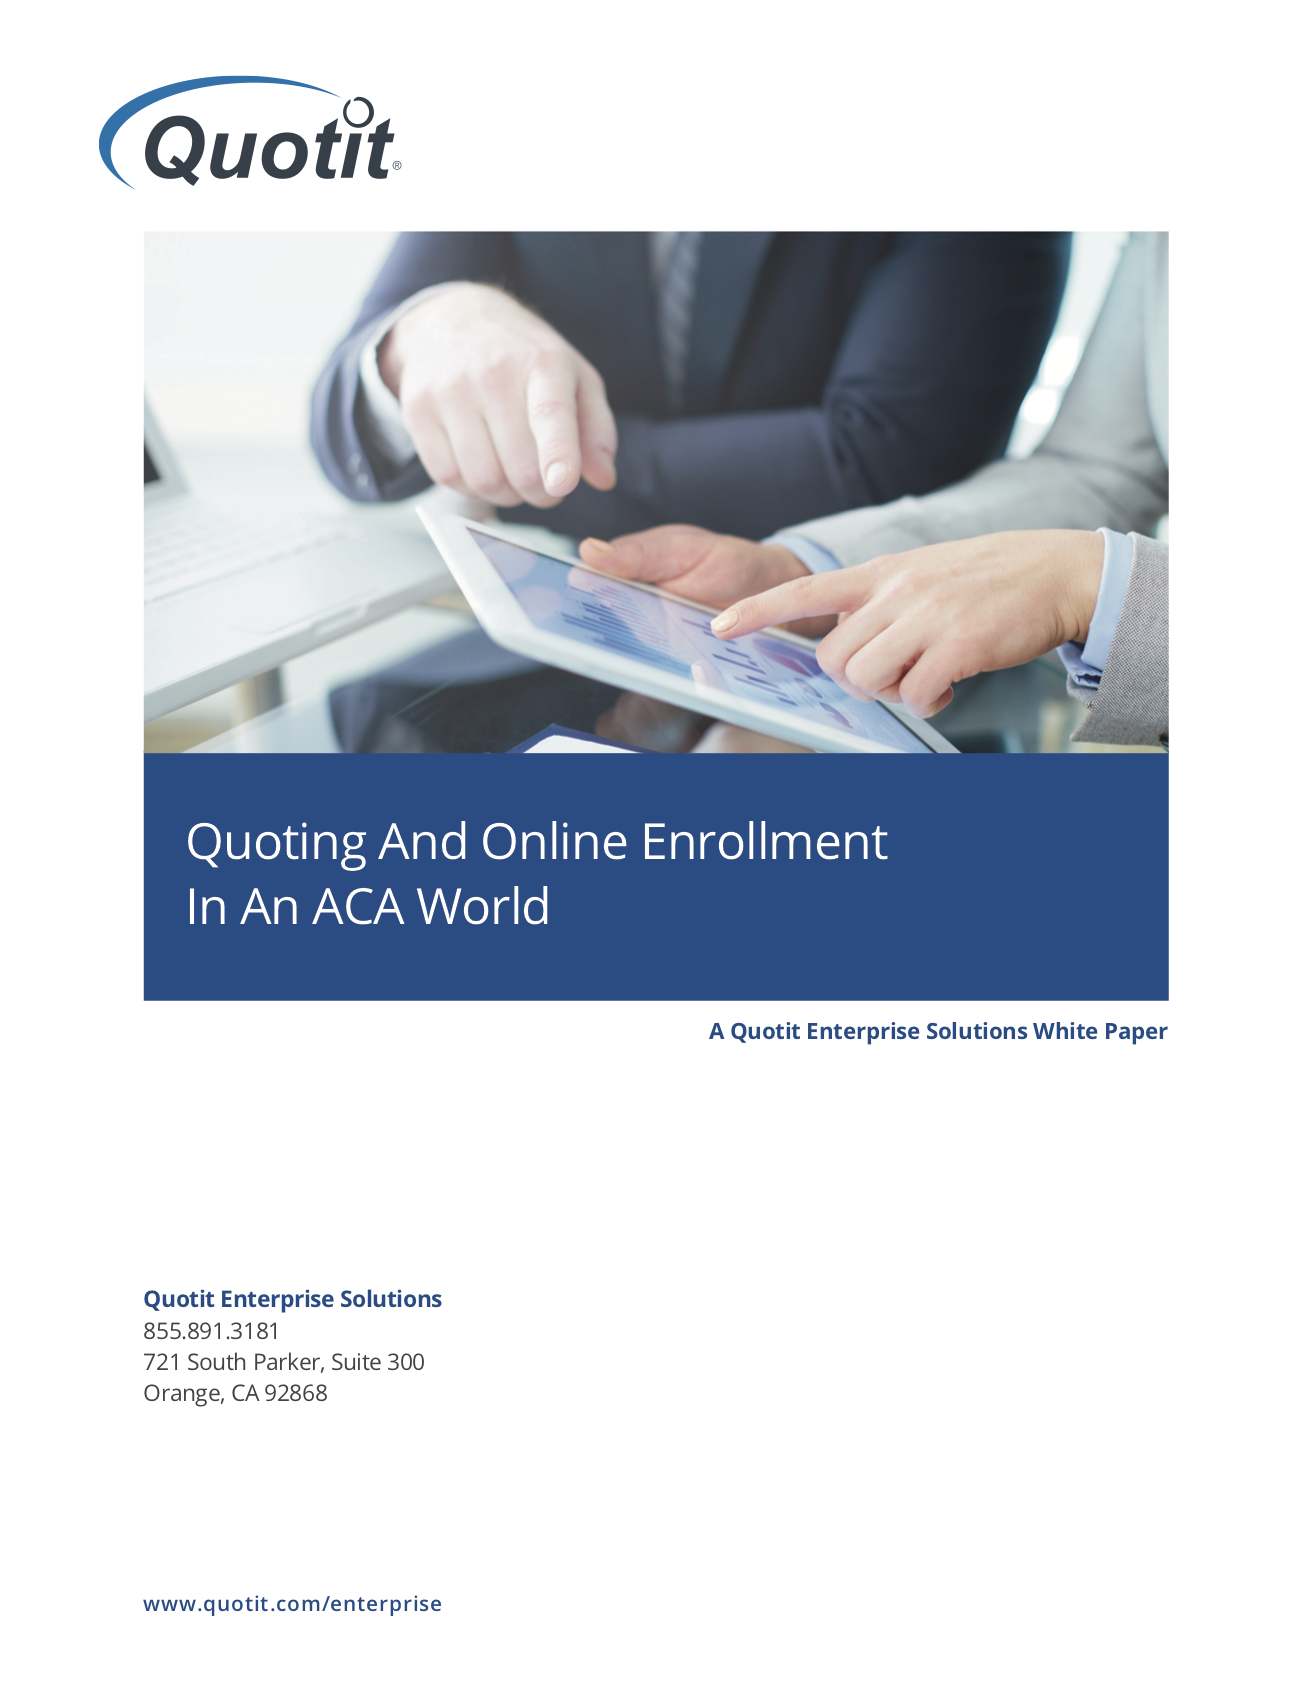 Quoting and Online Enrollment In An ACA World (cover)